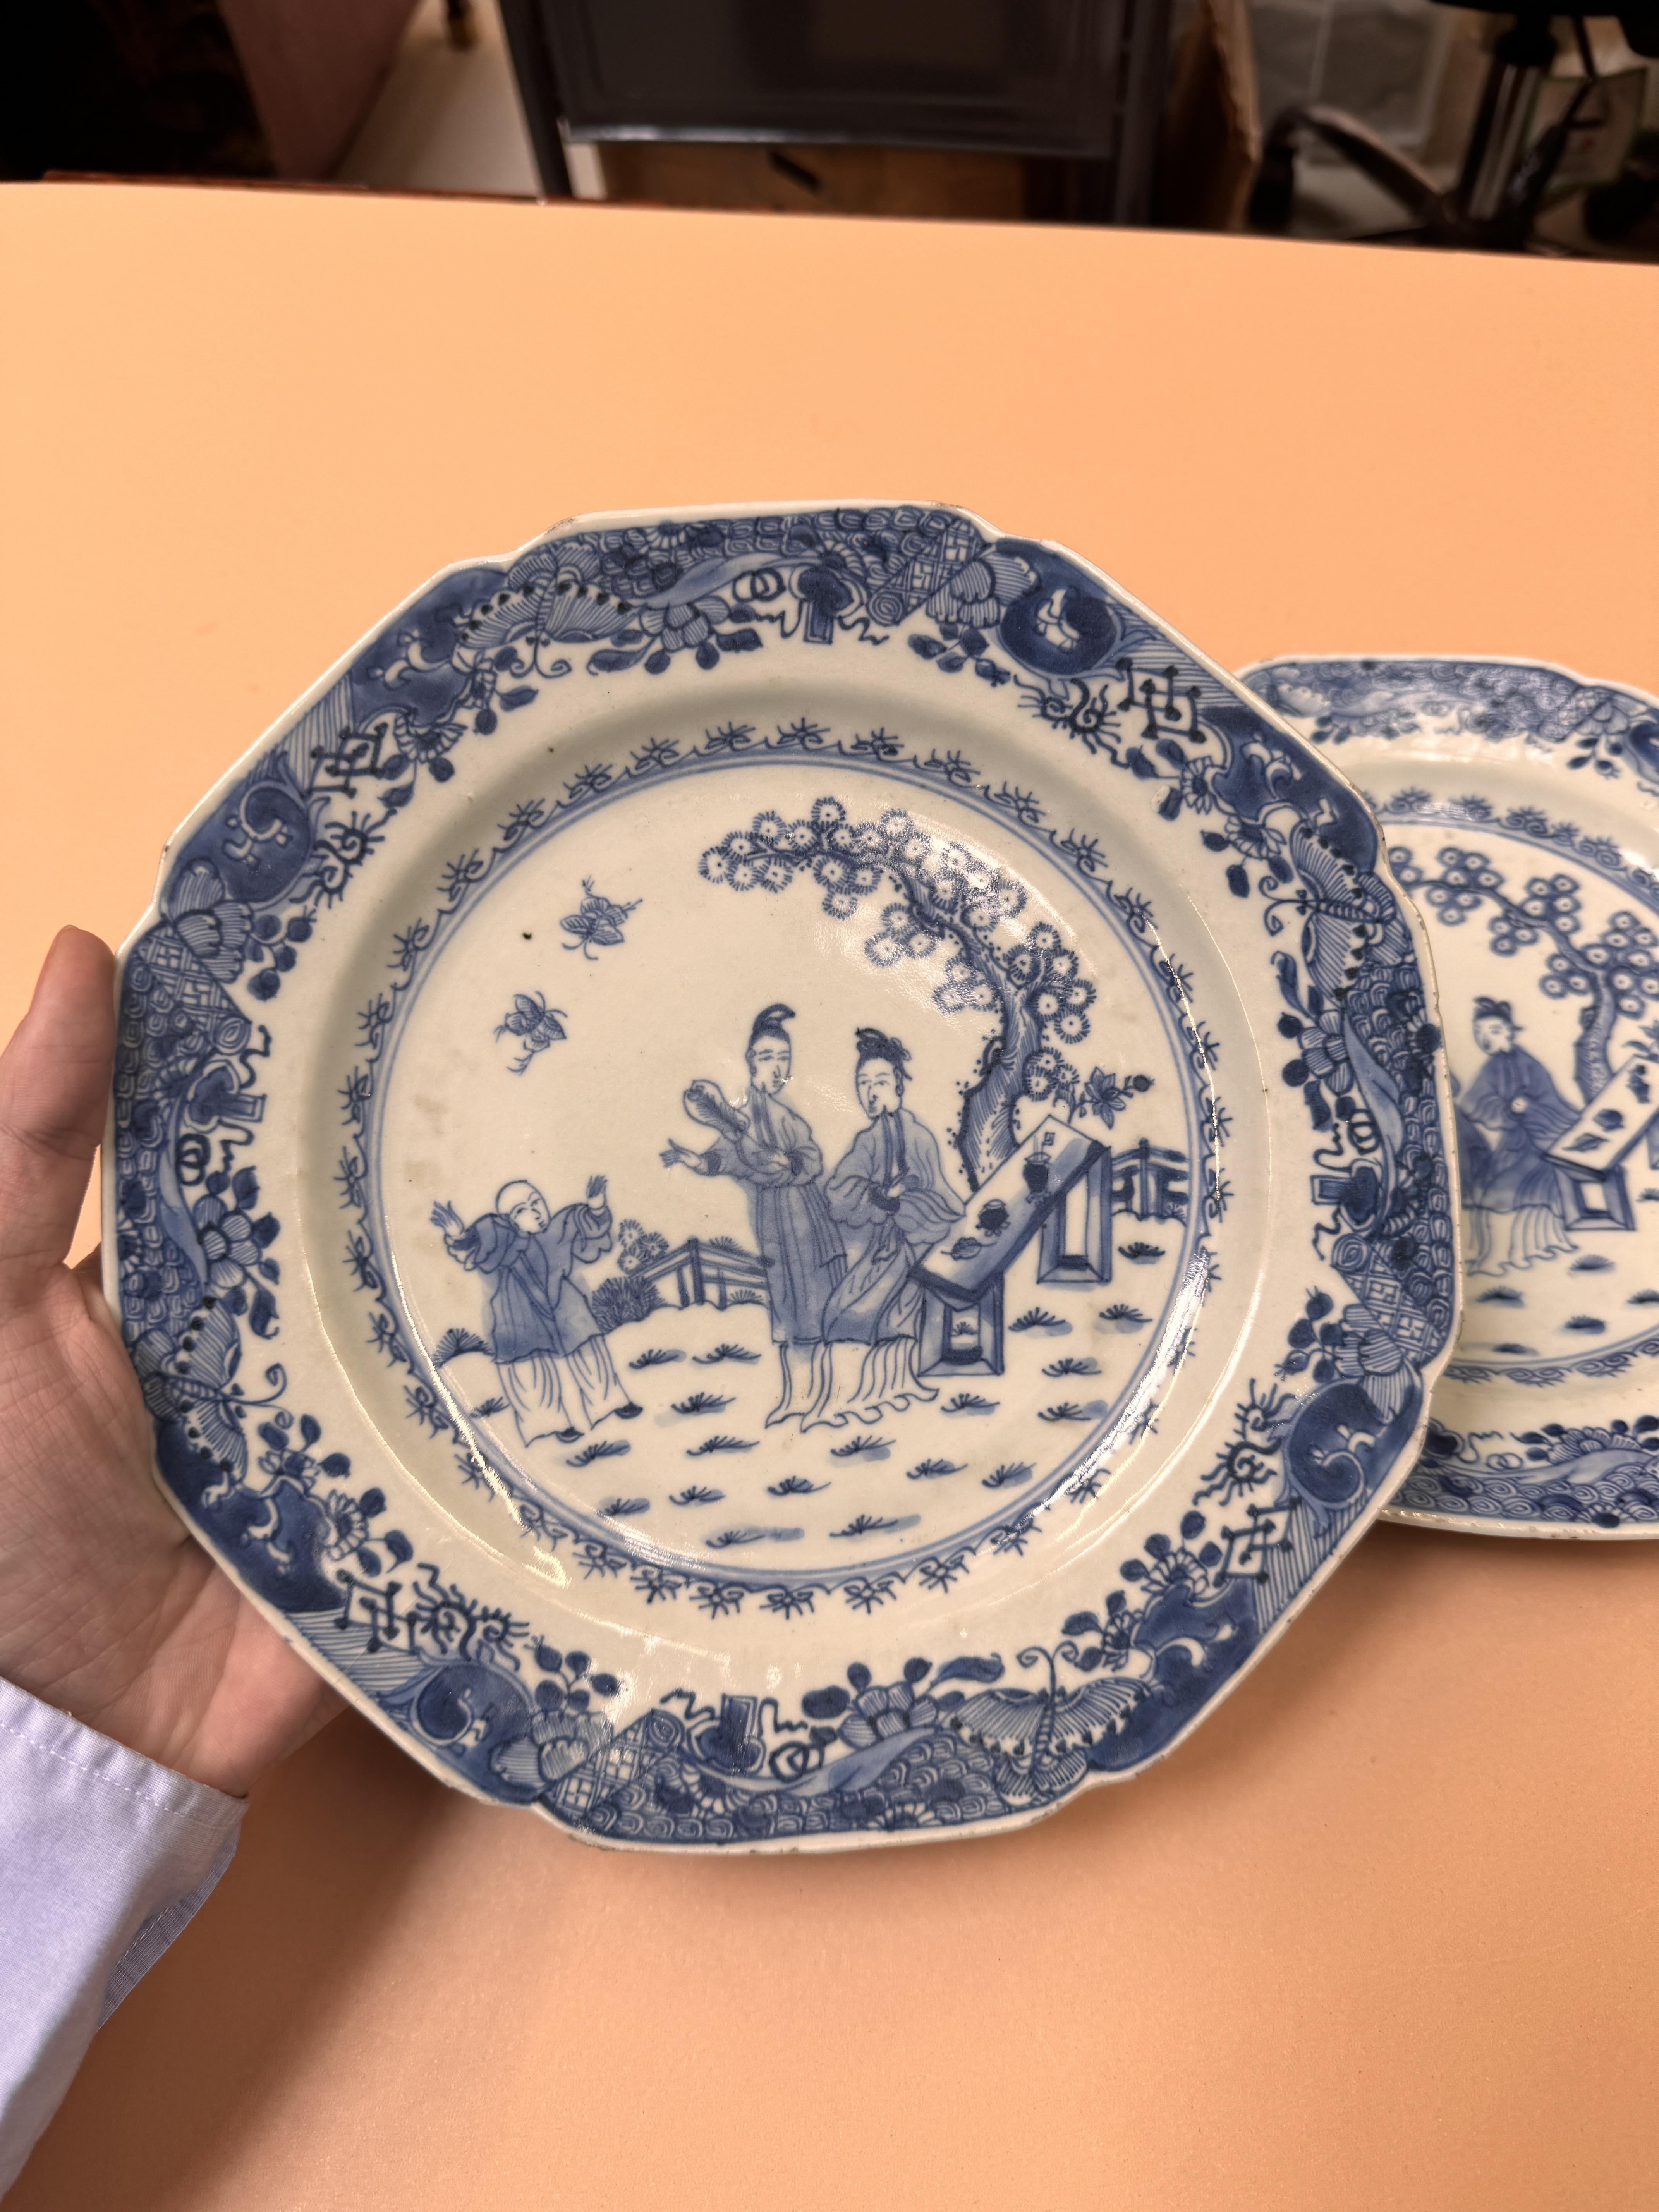 TWO CHINESE EXPORT BLUE AND WHITE DISHES 清十八世紀 外銷青花人物故事圖紋盤兩件 - Image 5 of 11